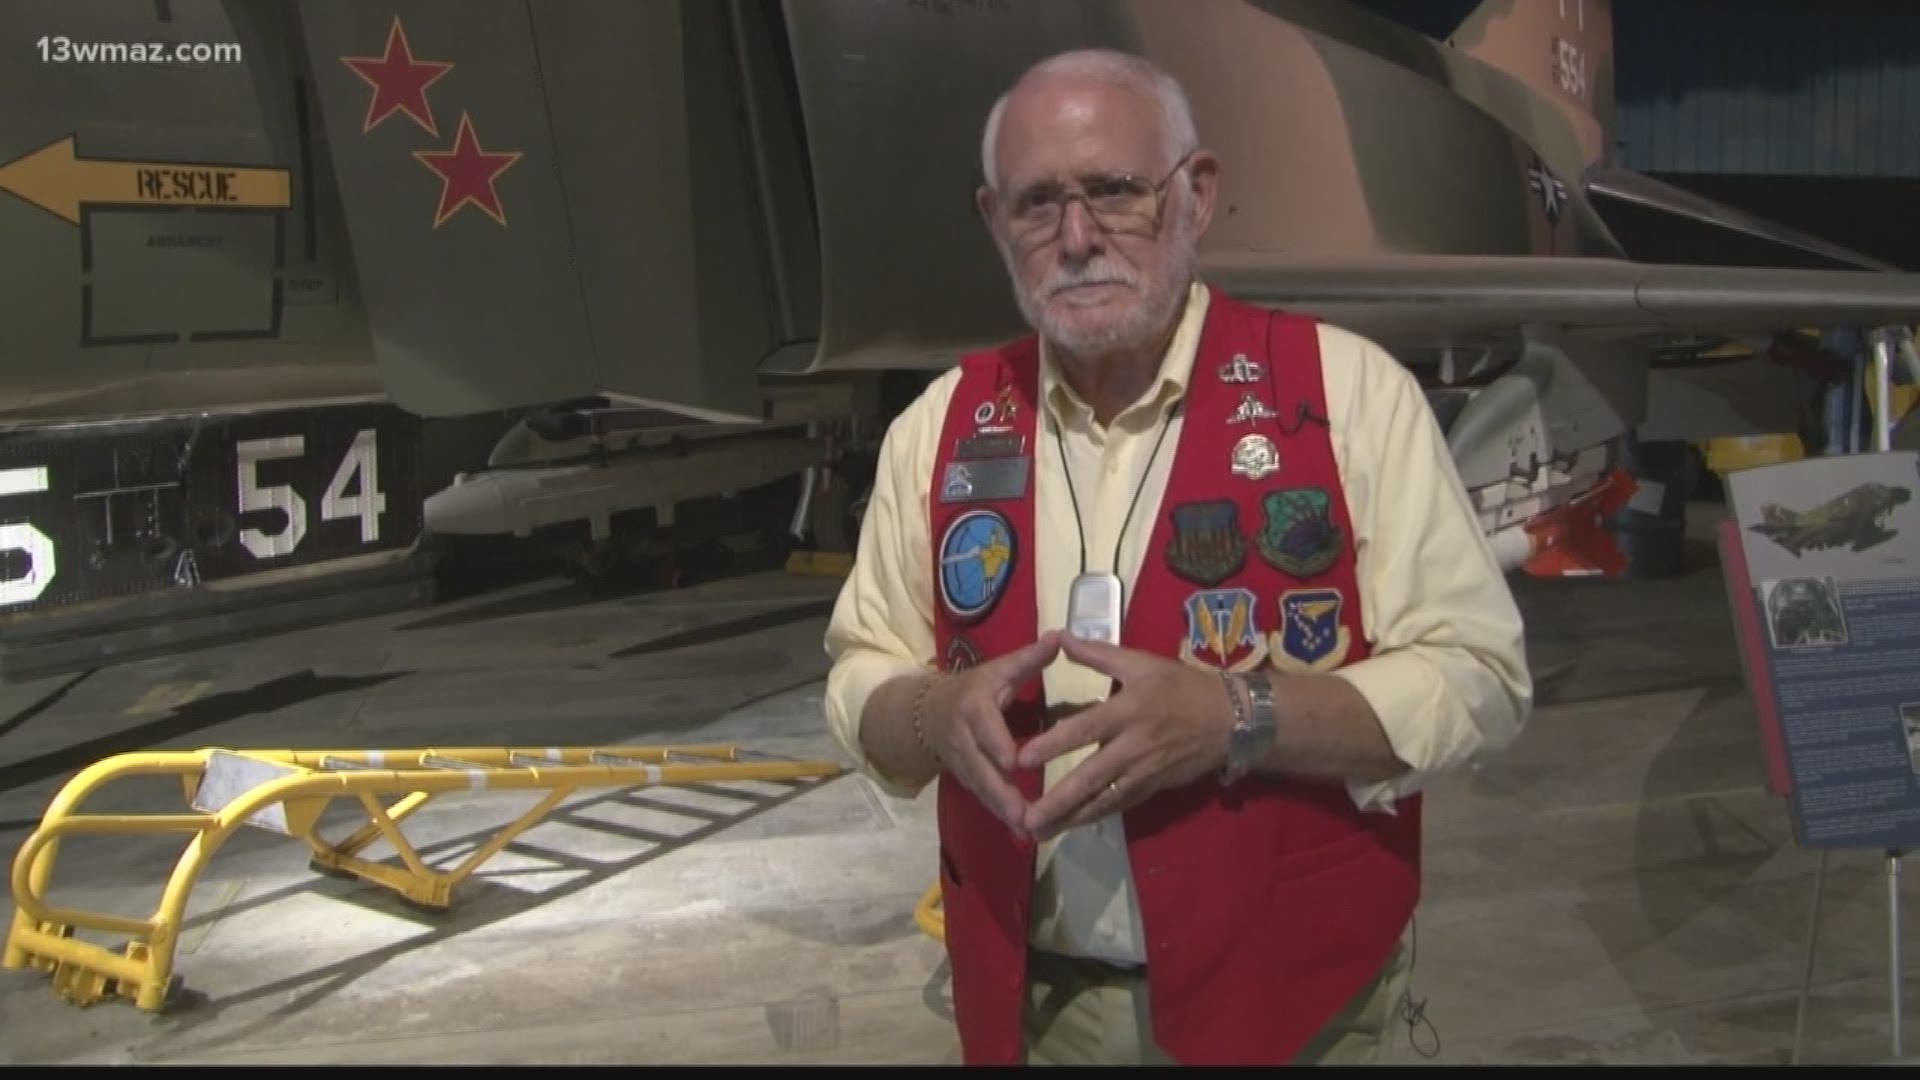 The Museum of Aviation relies on volunteers to keep the place running smoothly. One man has devoted over 1,000 hours helping keep history alive.